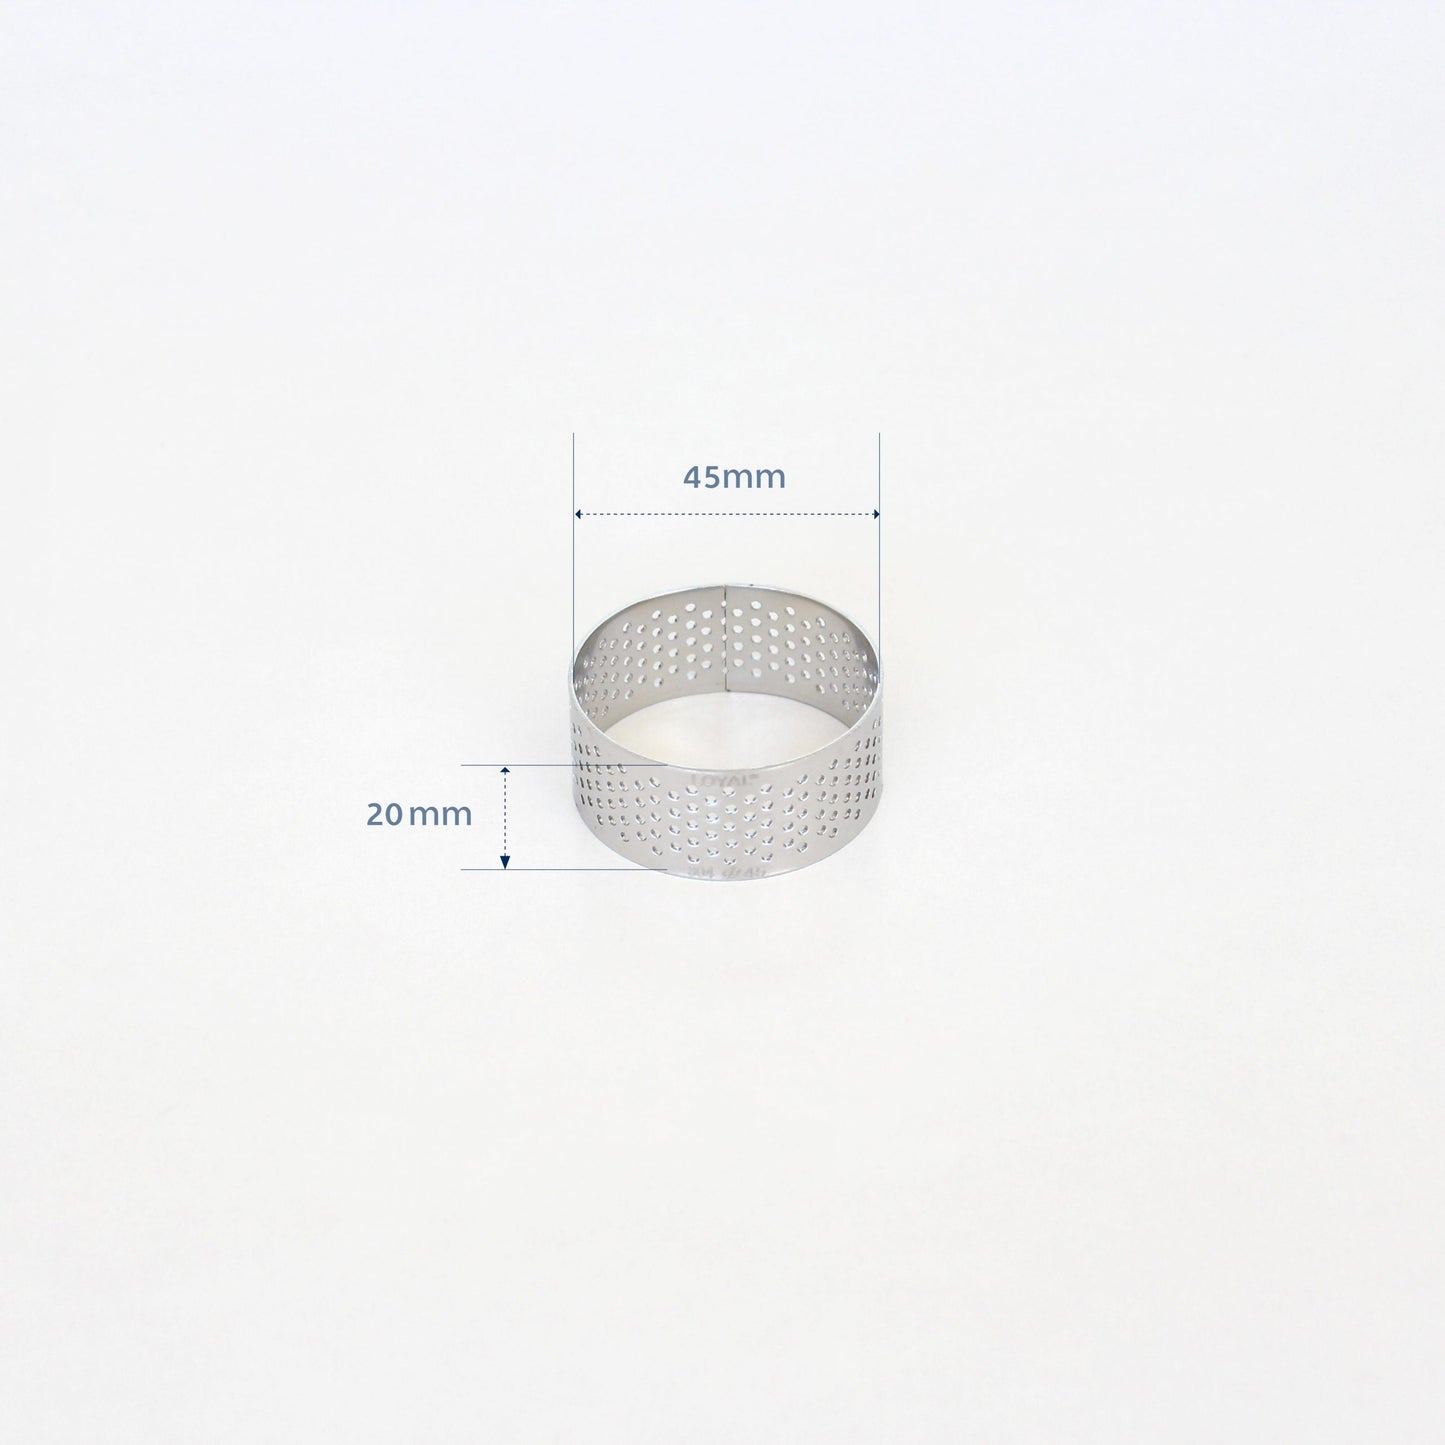 45mm PERFORATED RING S/S ROUND